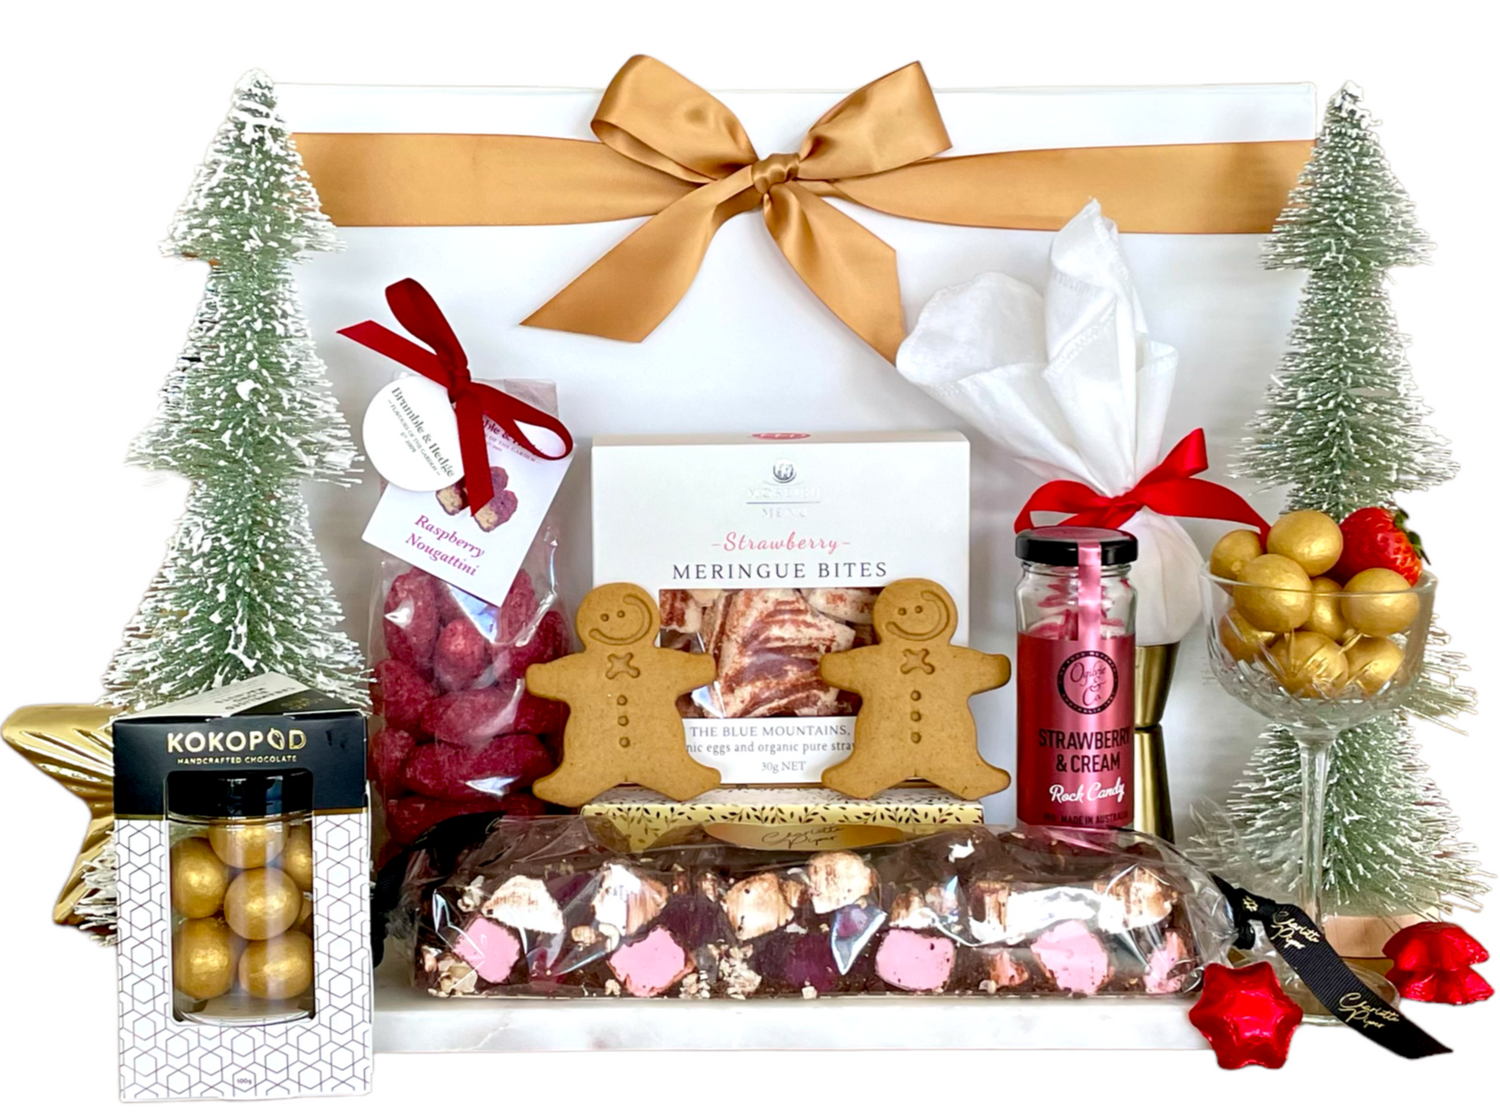 Christmas best Hamper Gift for Brisbane, Sunshine Coast, Noosa delivery. Surprise a boss, colleague friend or loved one with this Christmas gift hamper!